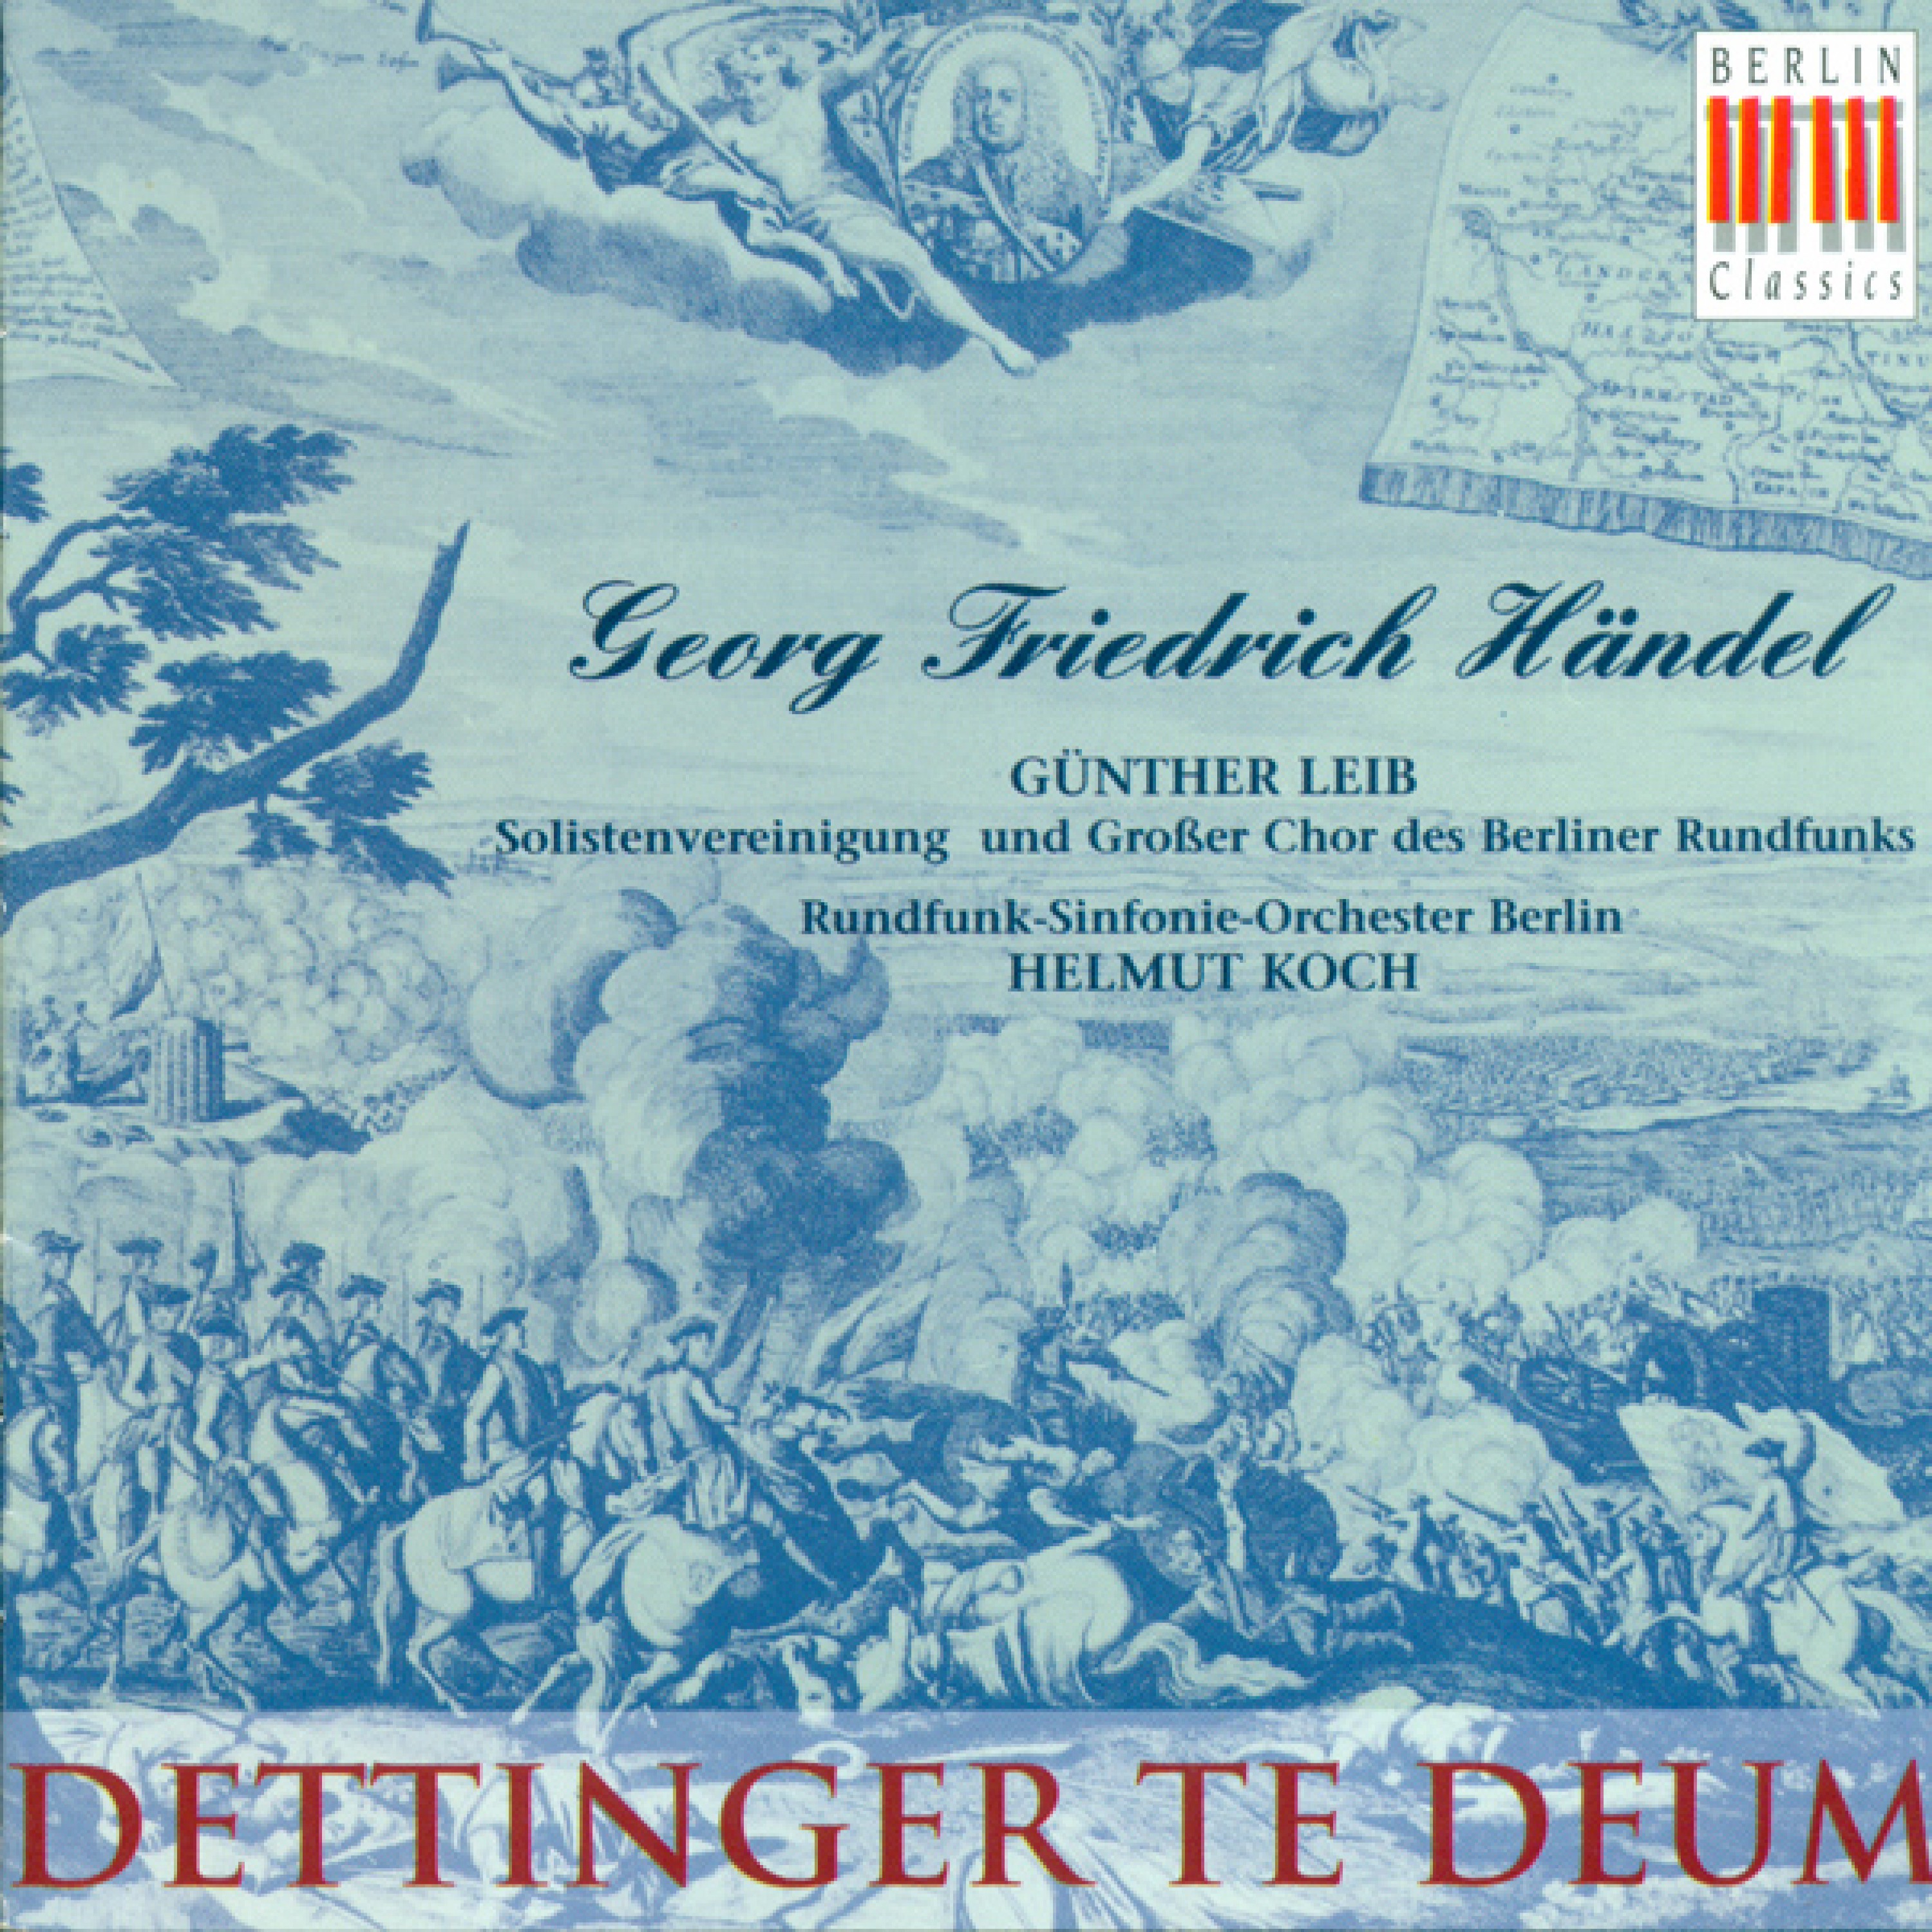 Te Deum in D major, HWV 283, "Dettingen": O Lord, in Thee have I trusted